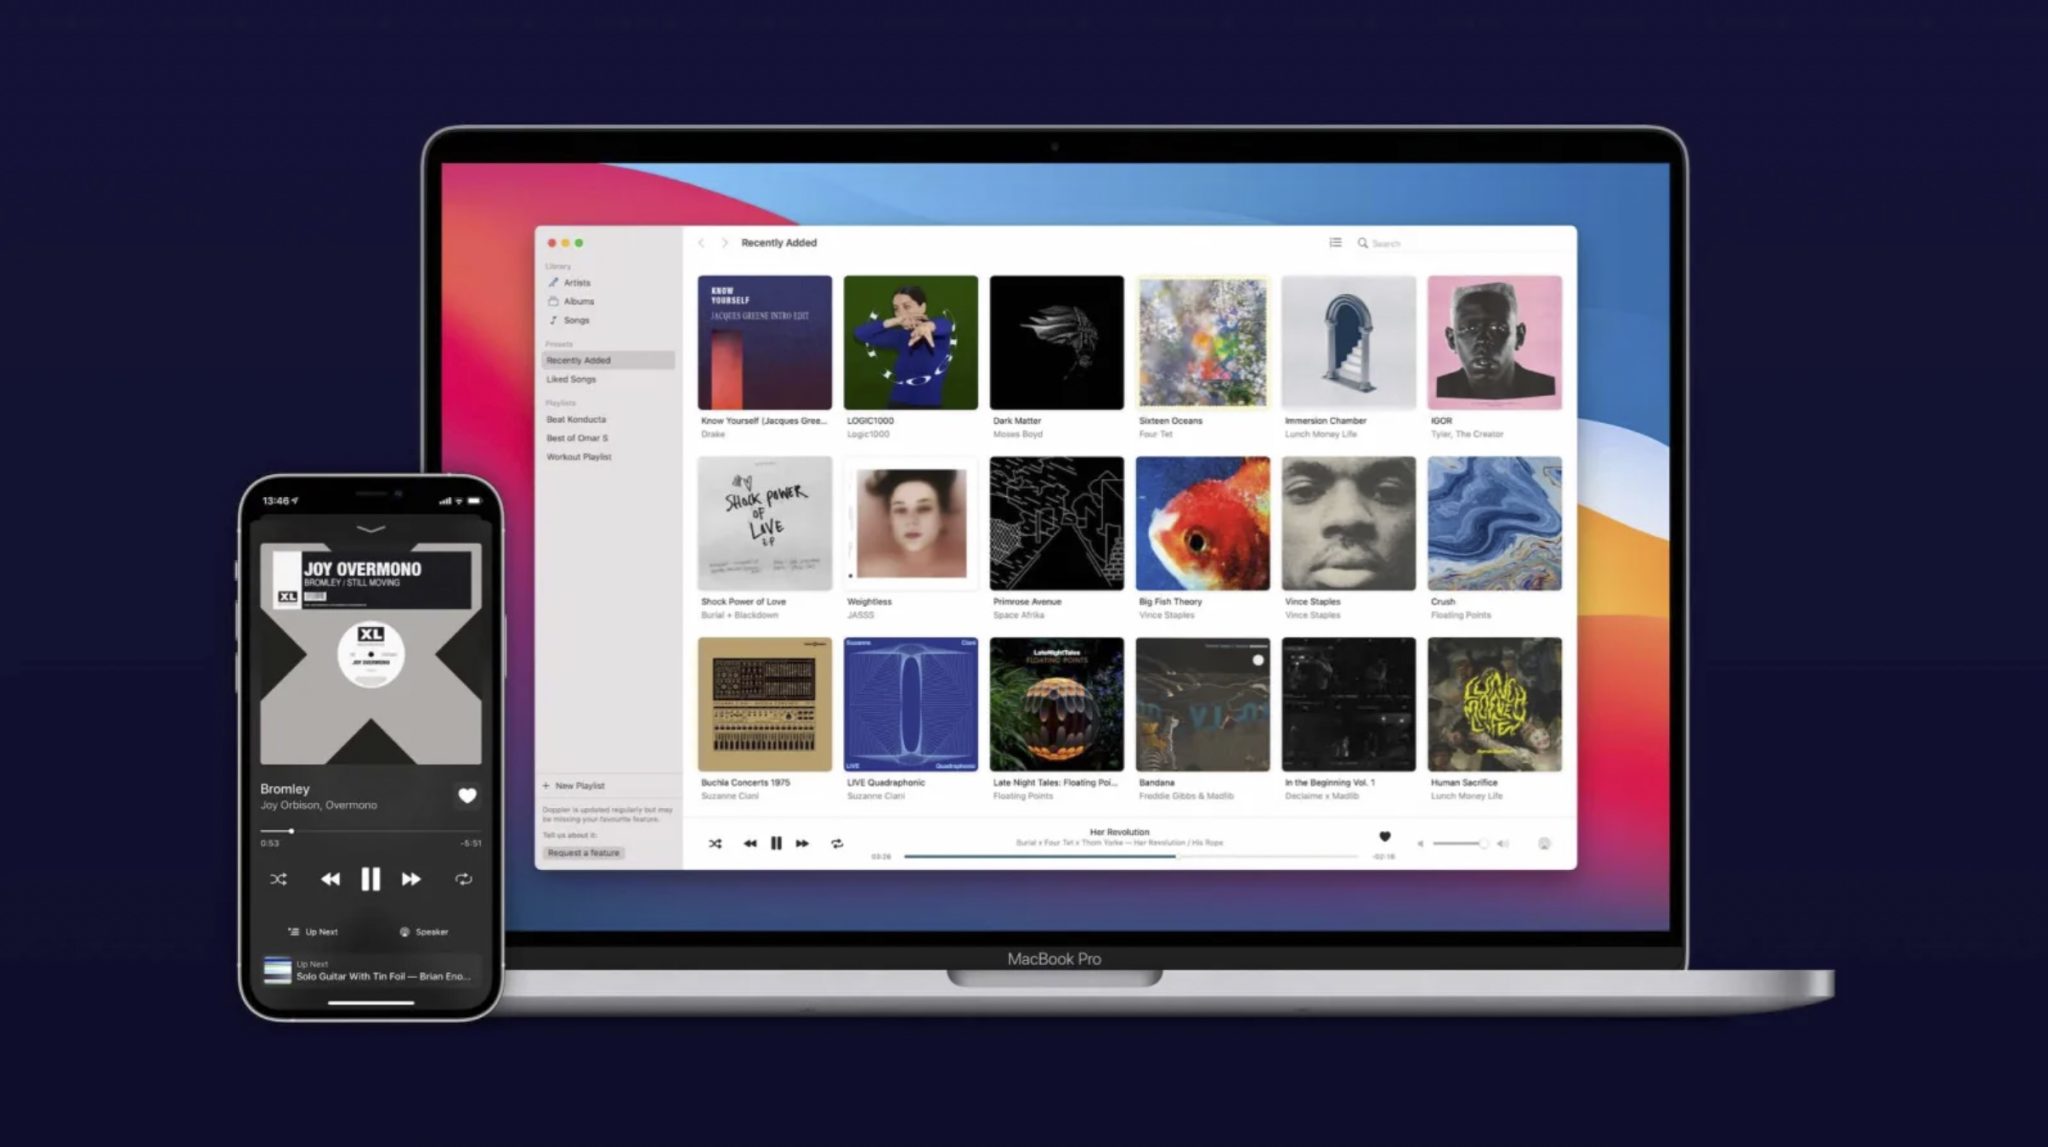 Third-party Doppler music app for macOS now supports importing music library from iTunes or Apple Music